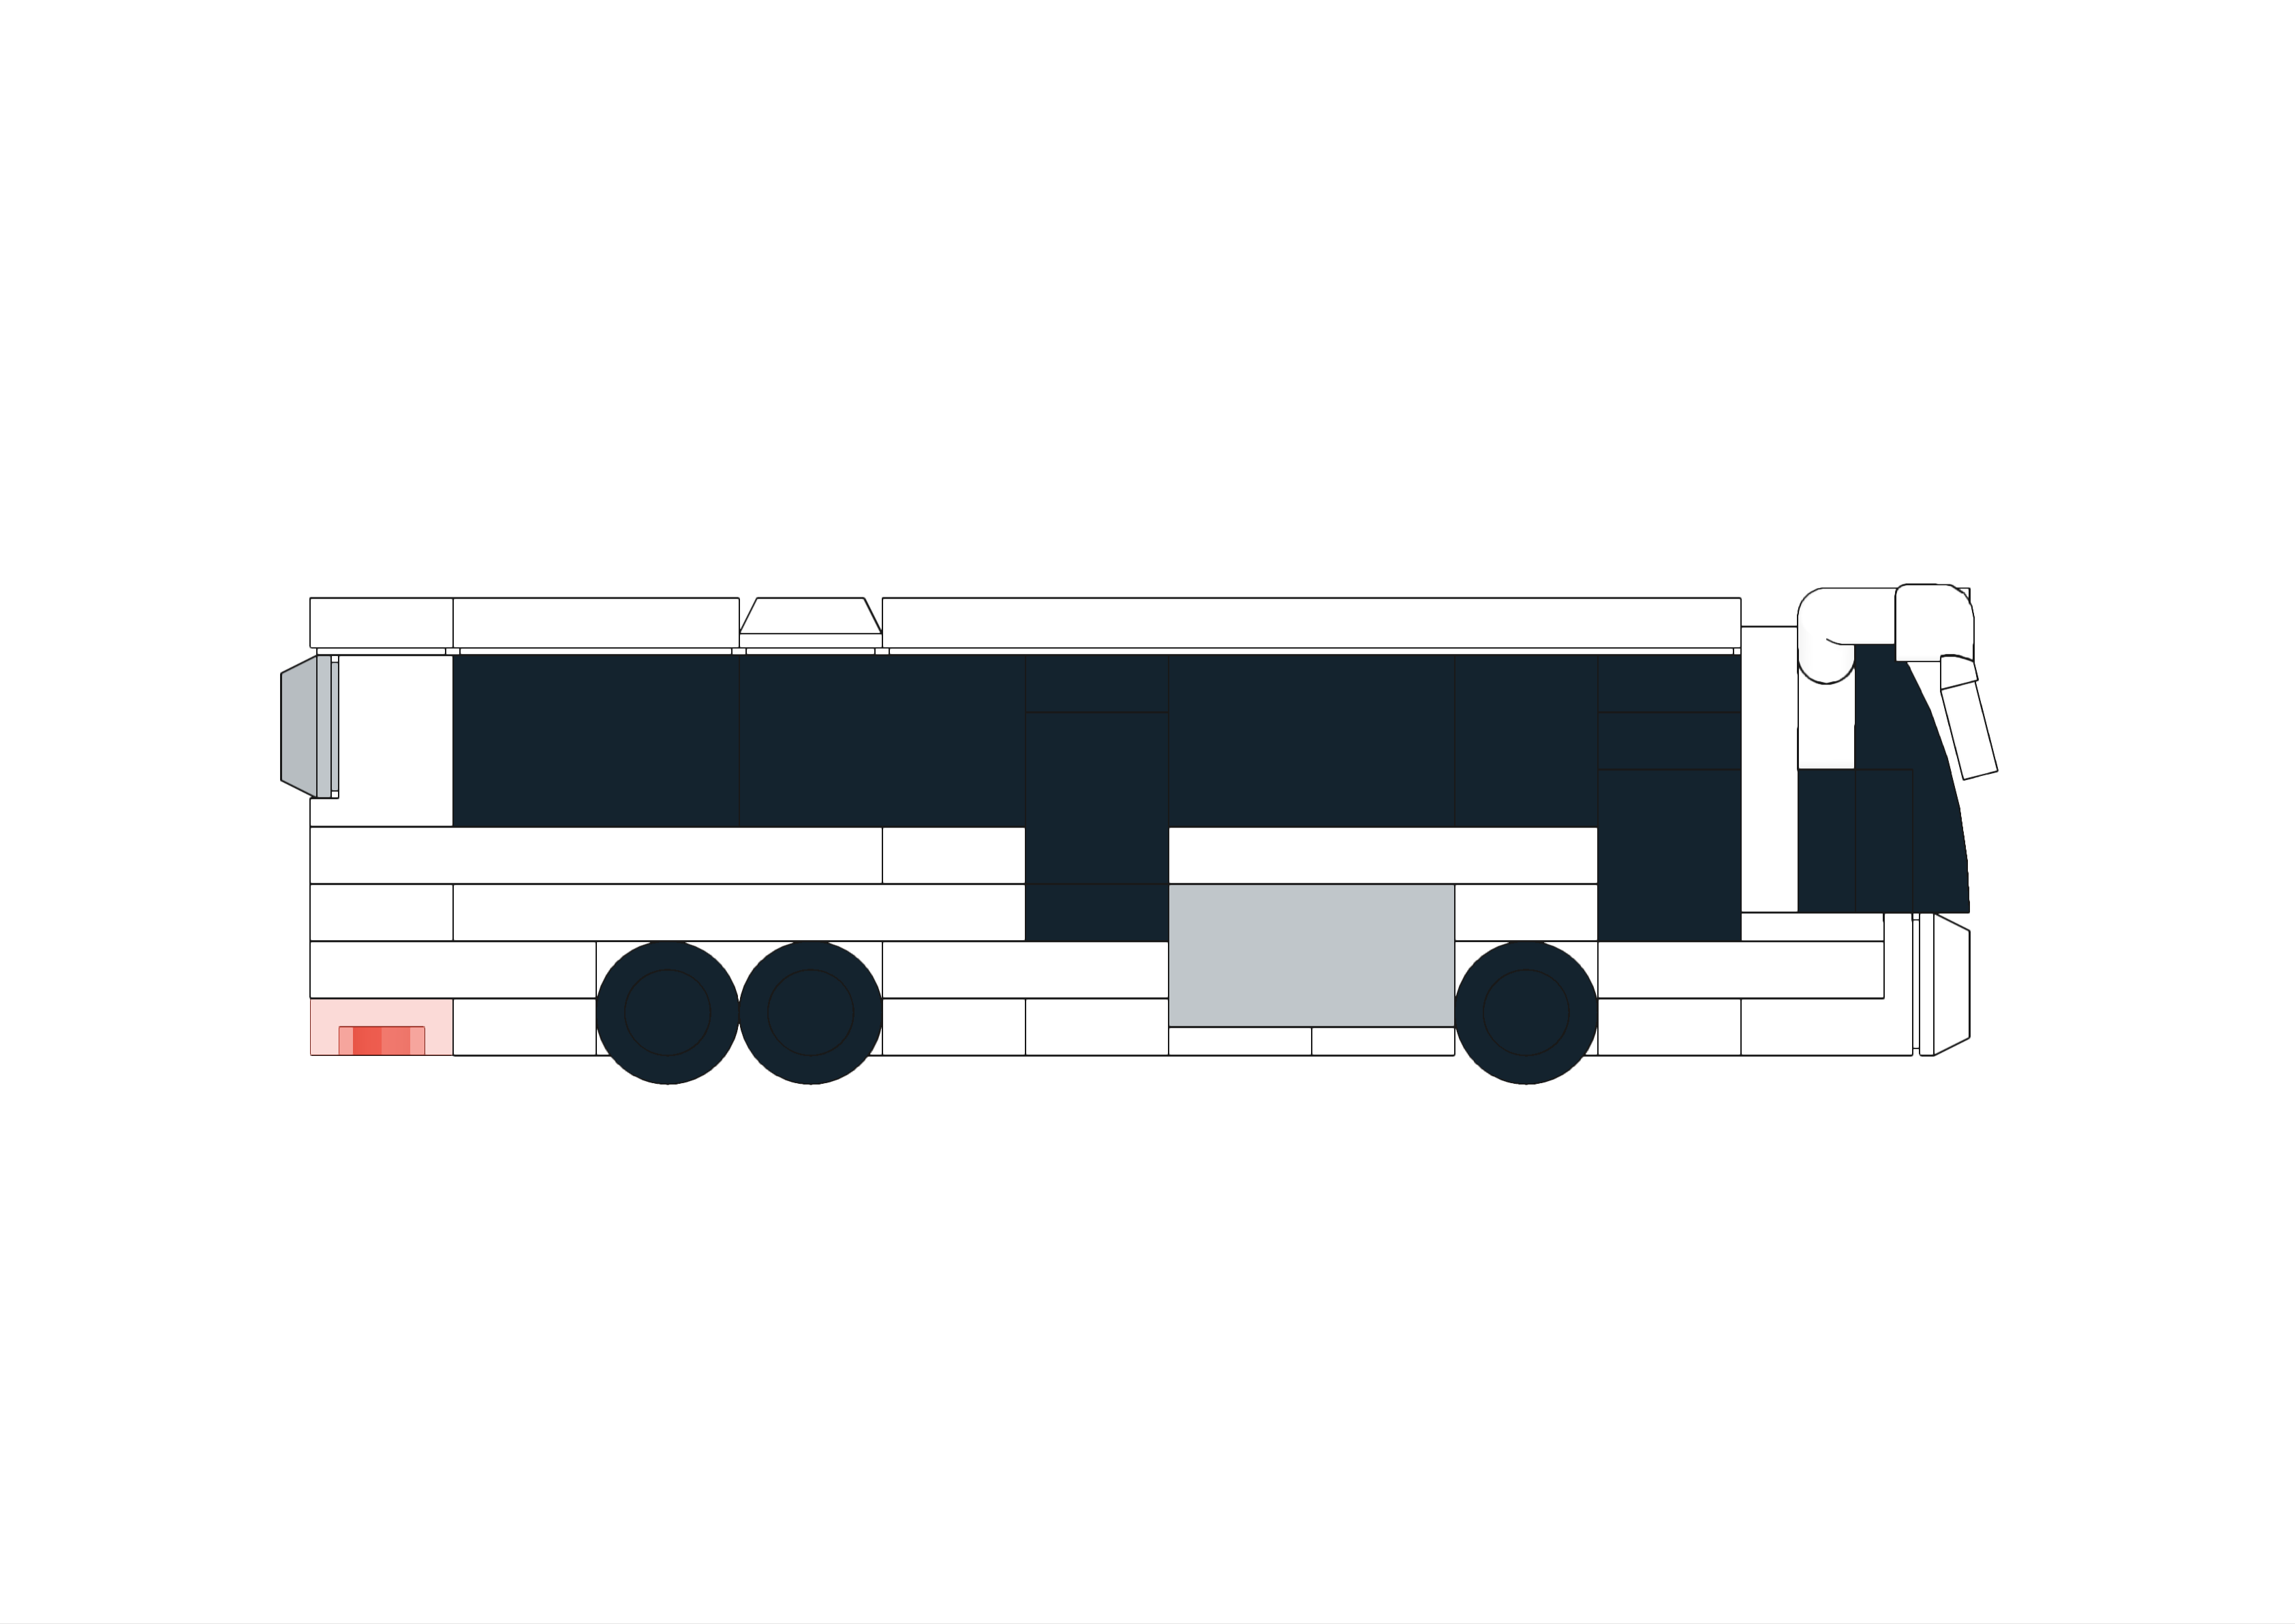 Alternate side view image of the LEGO Micro Charter Bus MOC.